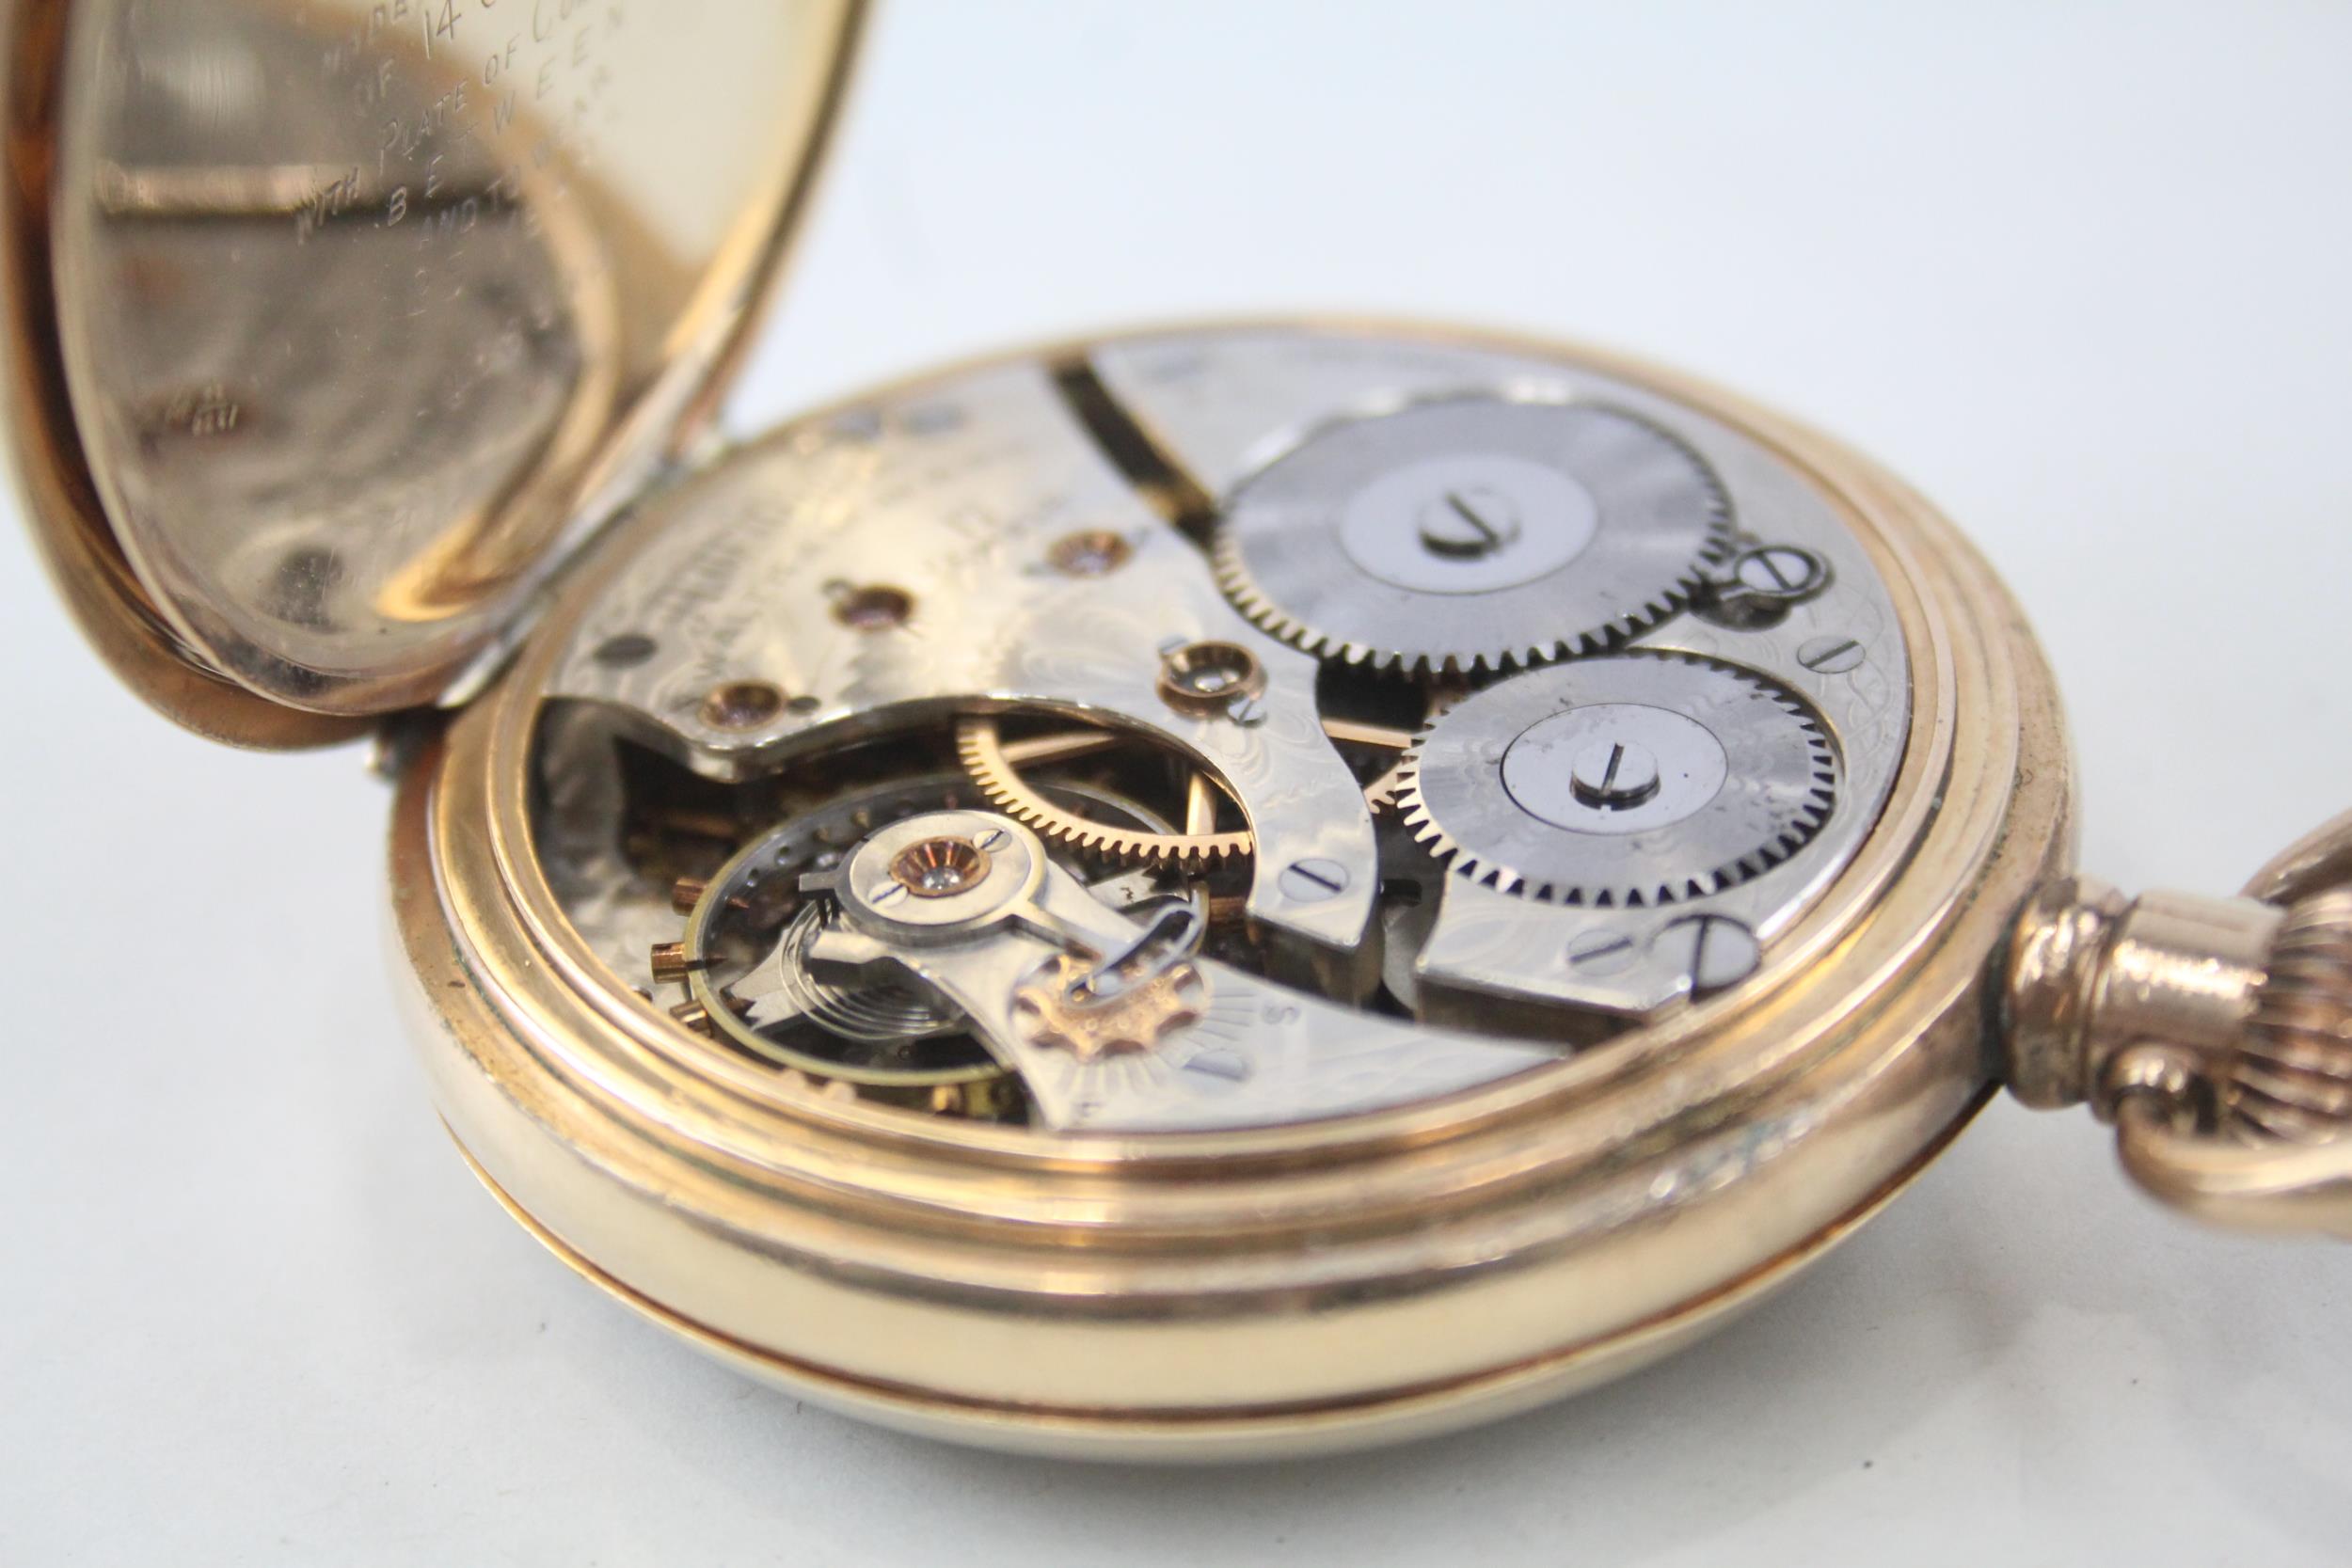 WALTHAM Gents Rolled Gold Open Face Pocket Watch Hand-wind WORKING - WALTHAM Gents Rolled Gold - Image 3 of 5